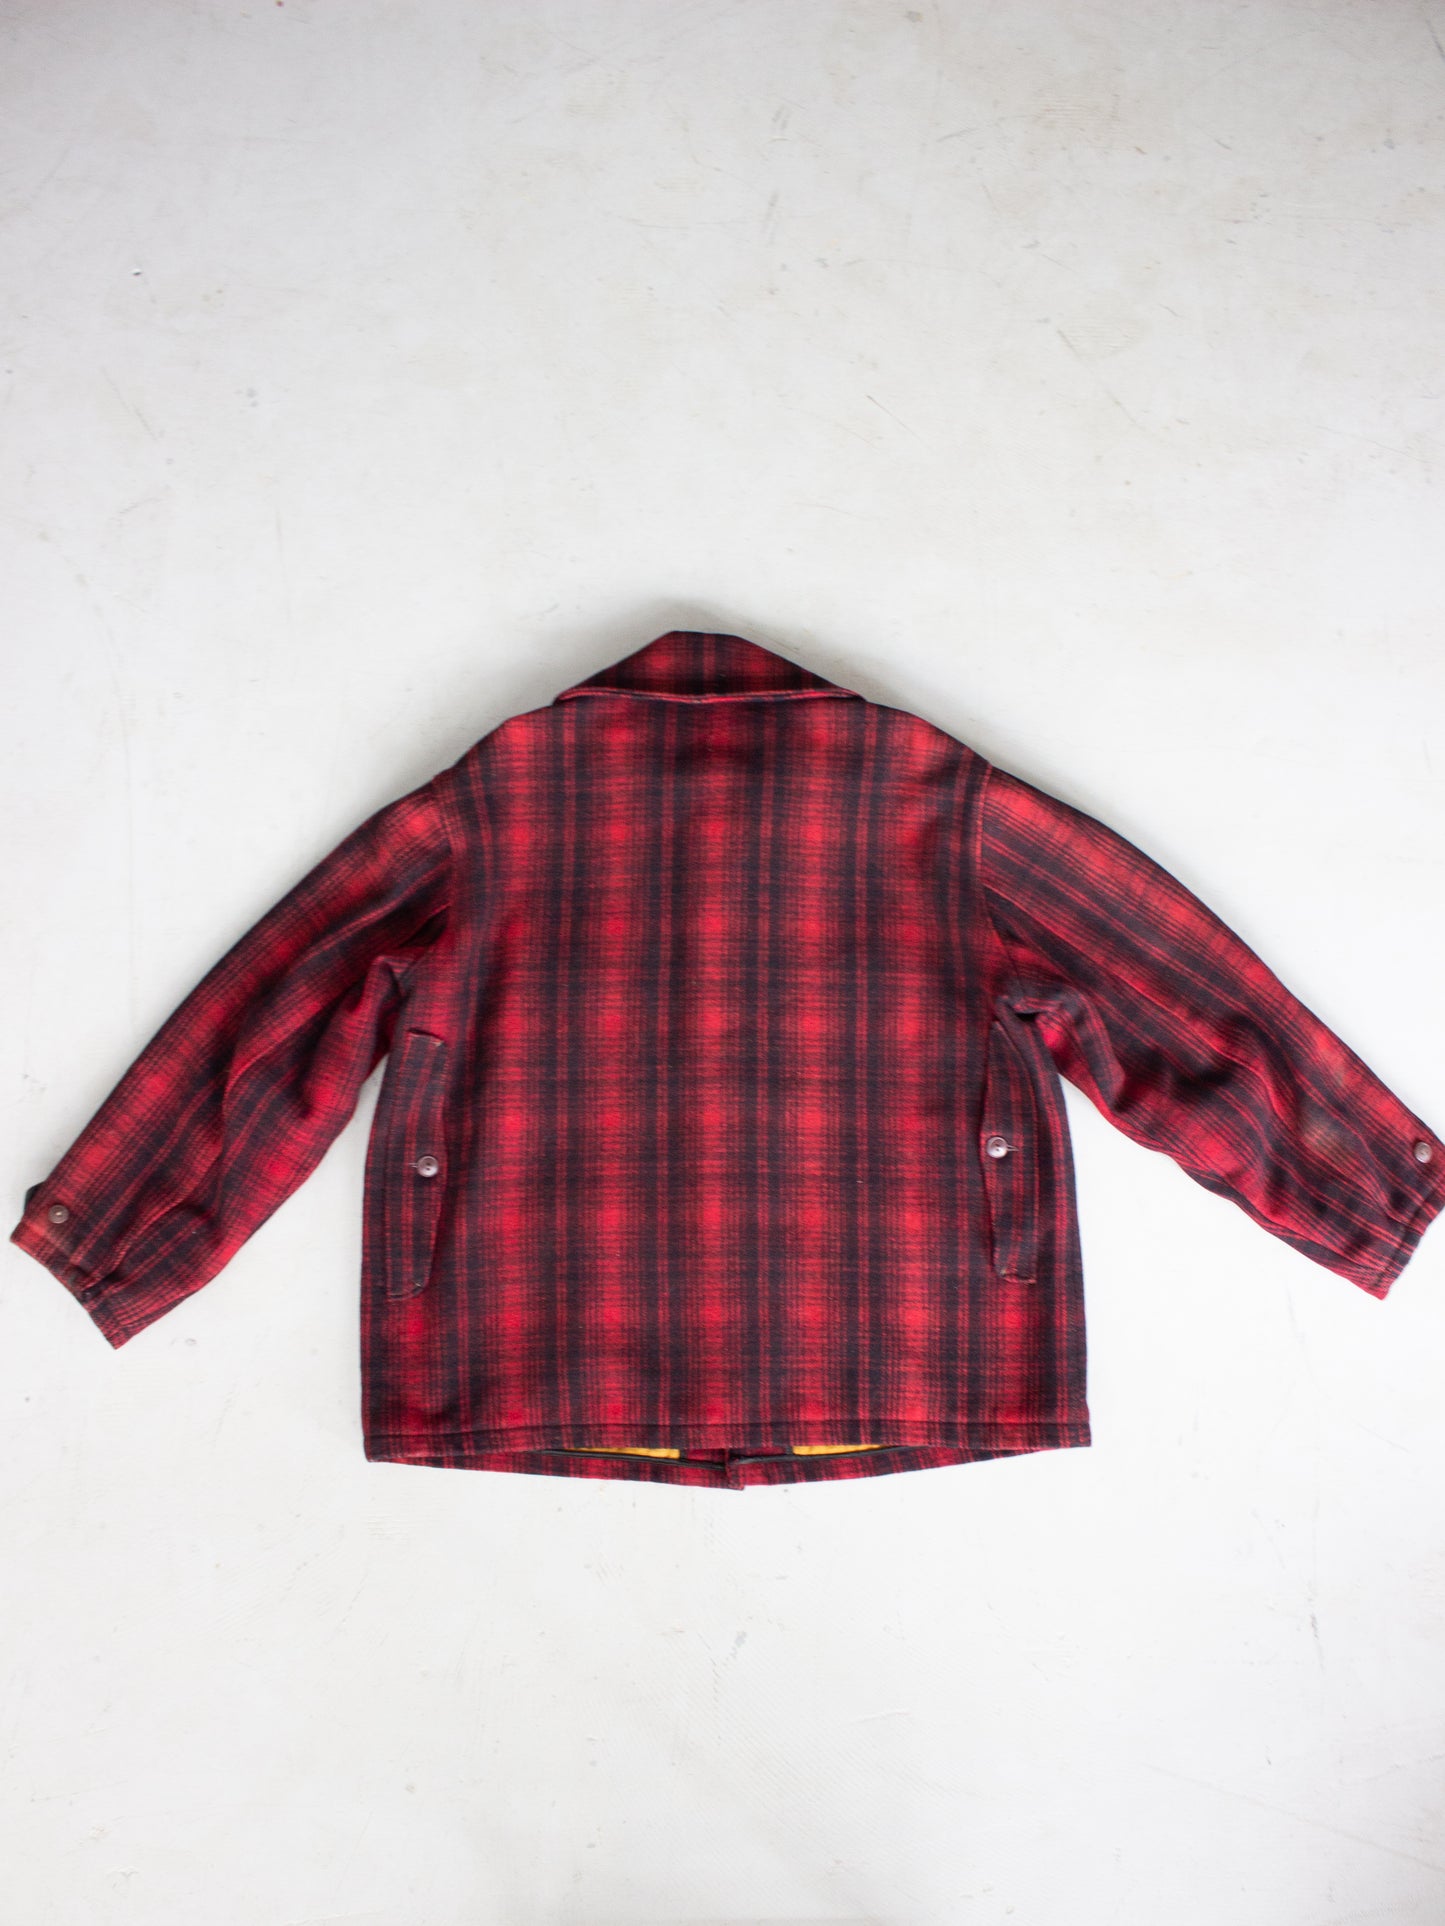 1950's Woolrich Red Buffalo Plaid Hunting Jacket Style 503 (X Large)